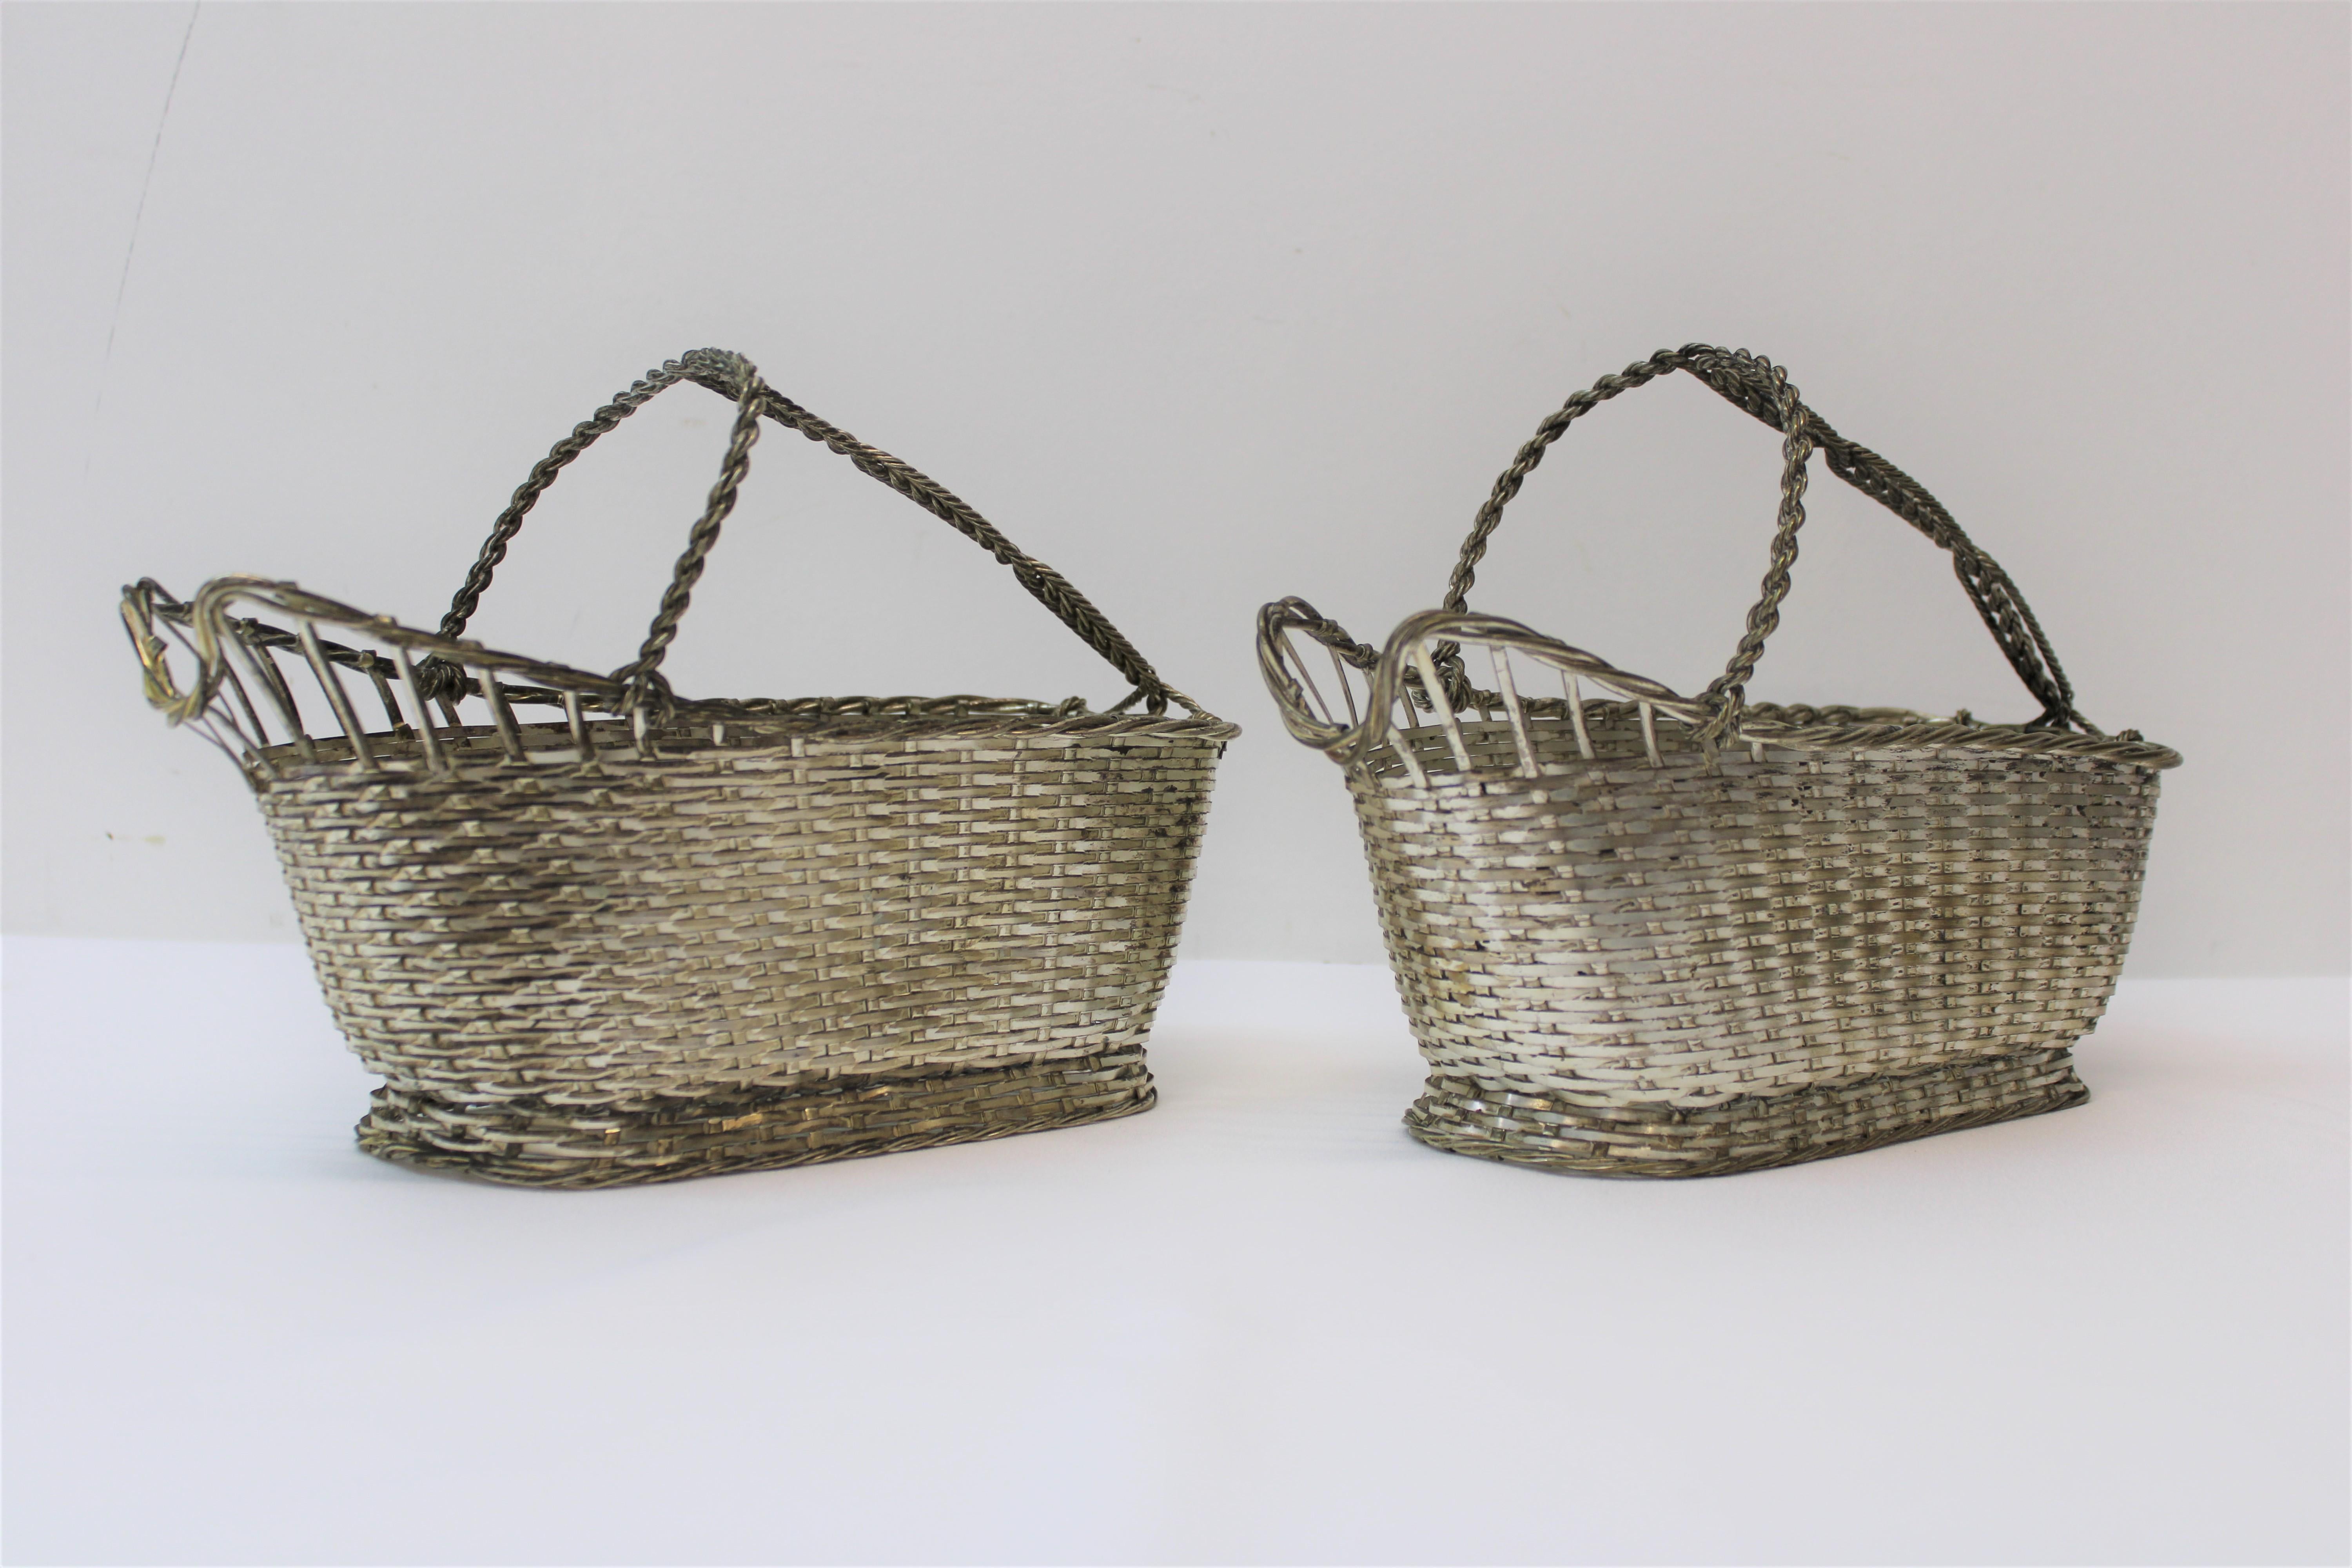 C. 20th century French silver plate woven wine bottle holders / baskets
Christofle Gallia Series.